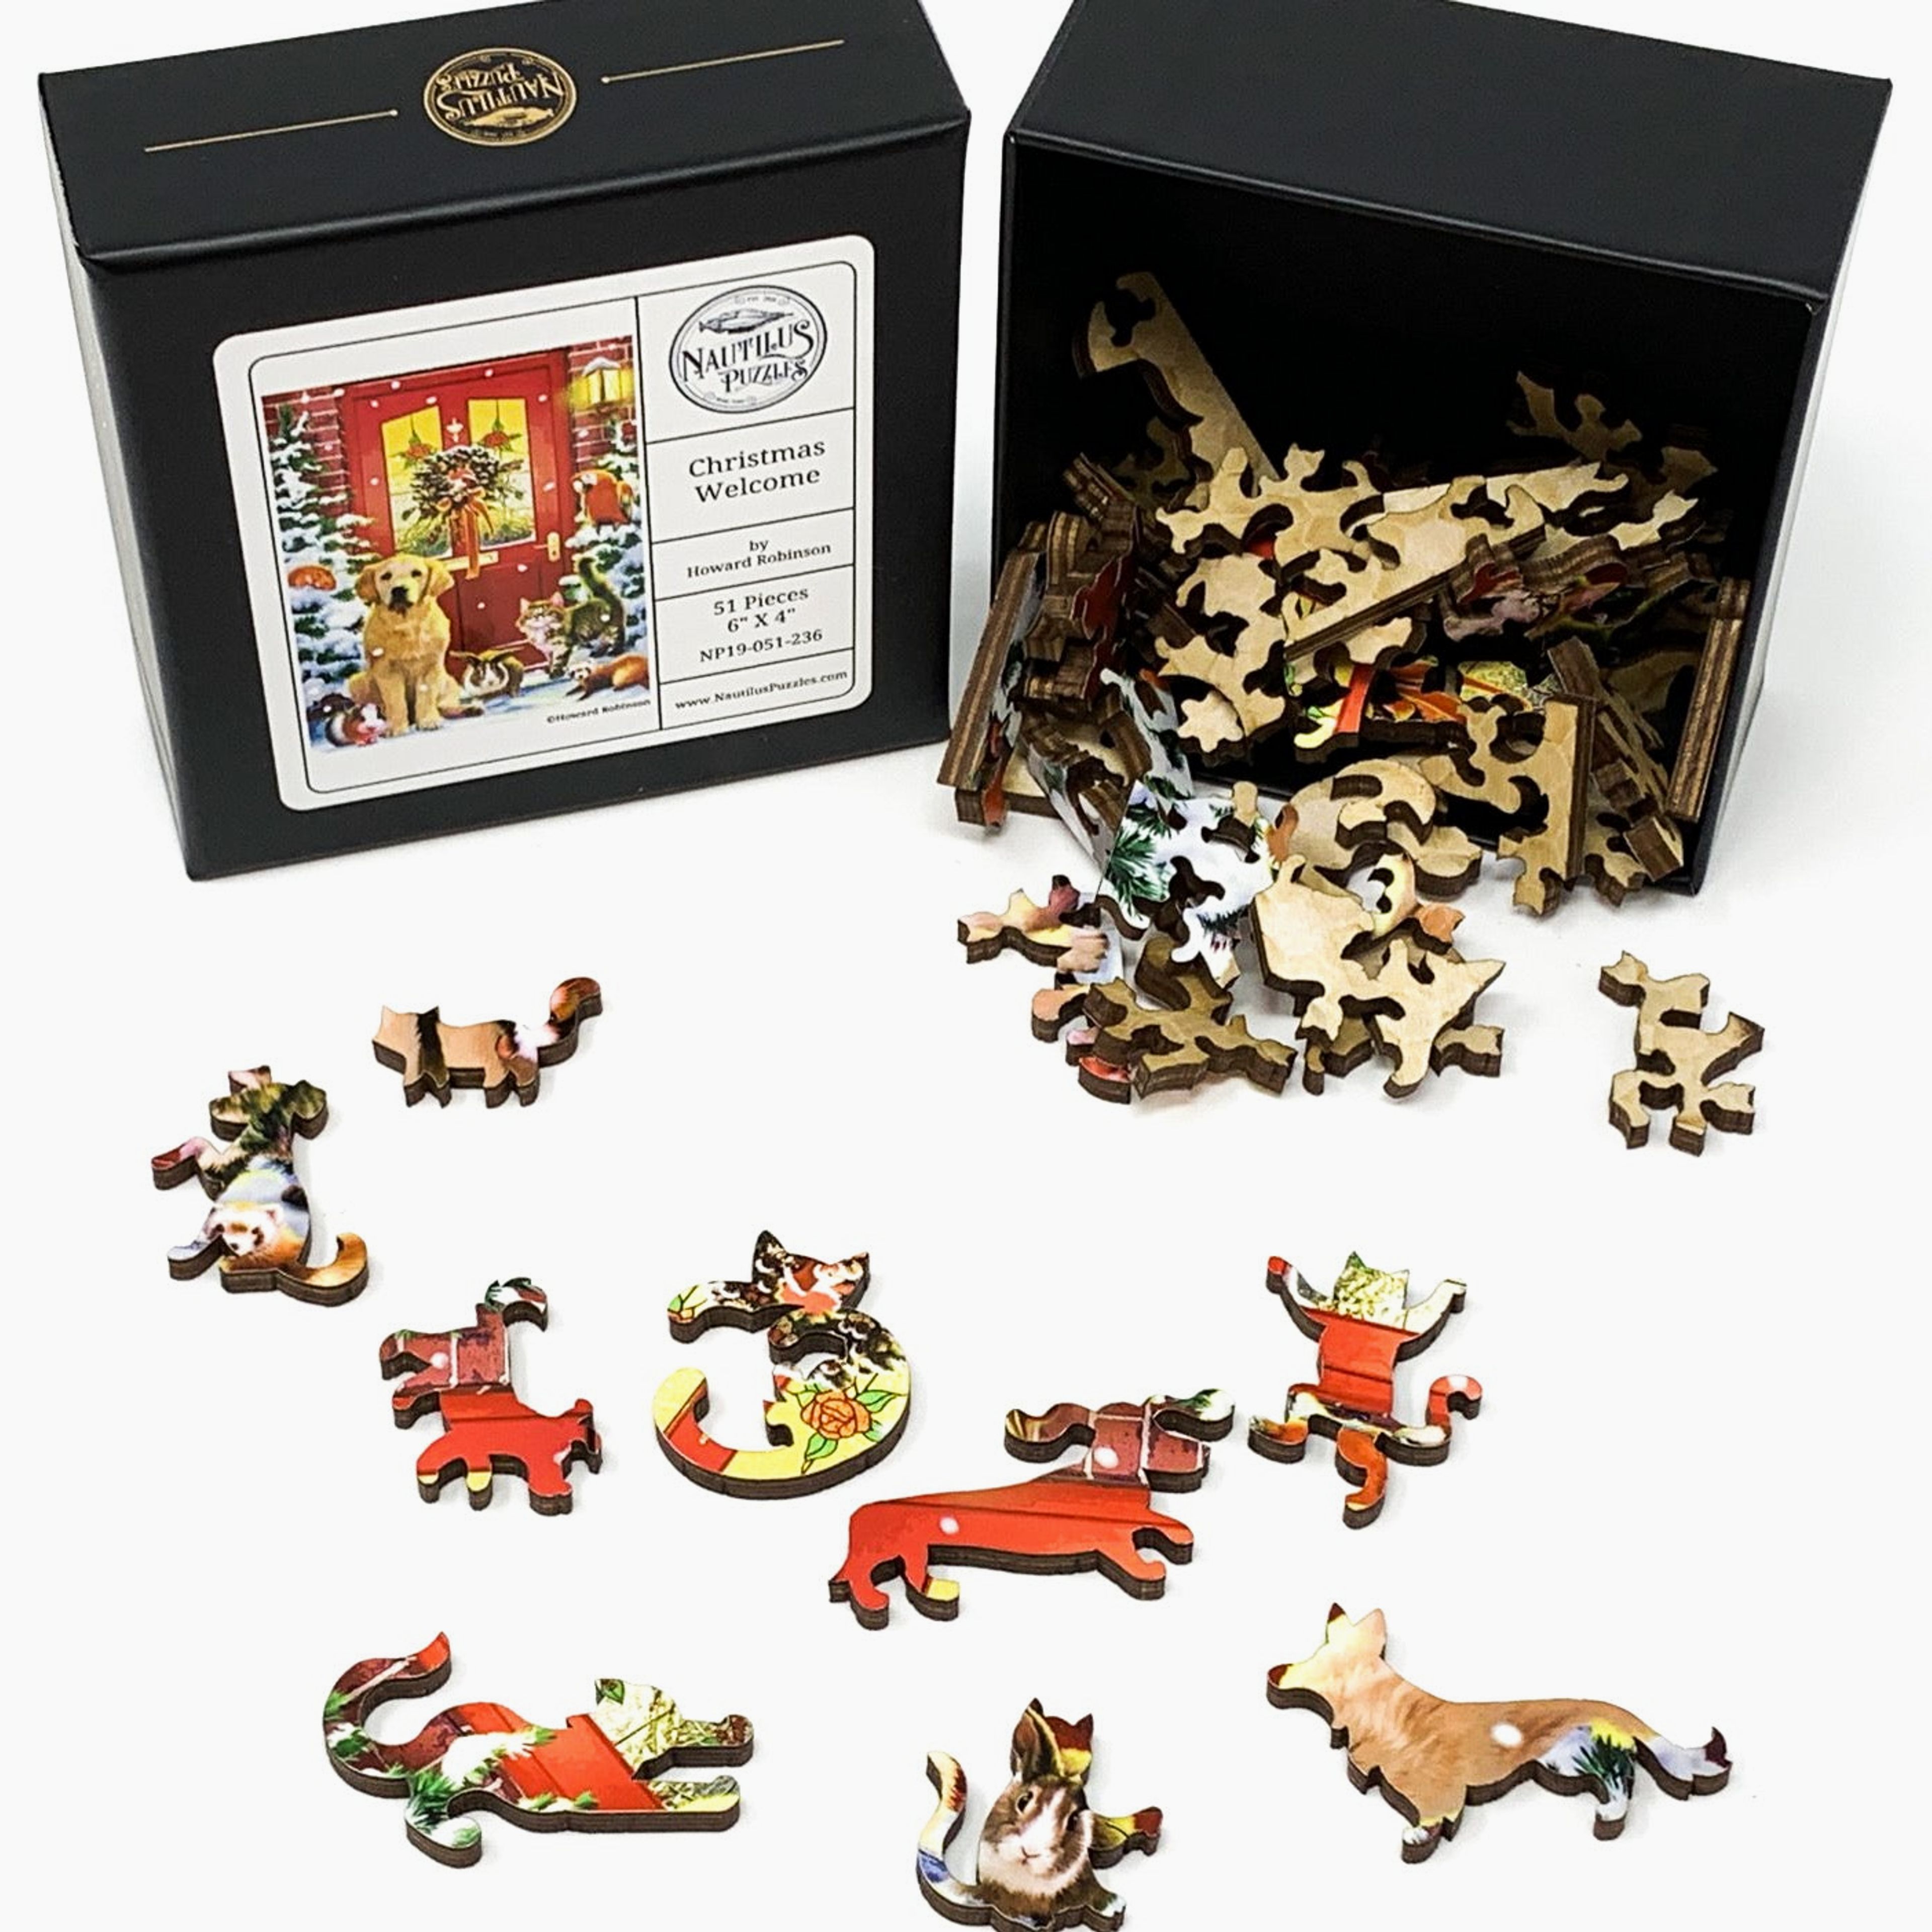 Christmas Welcome (51 Piece Mini Christmas Wooden Jigsaw Puzzle)